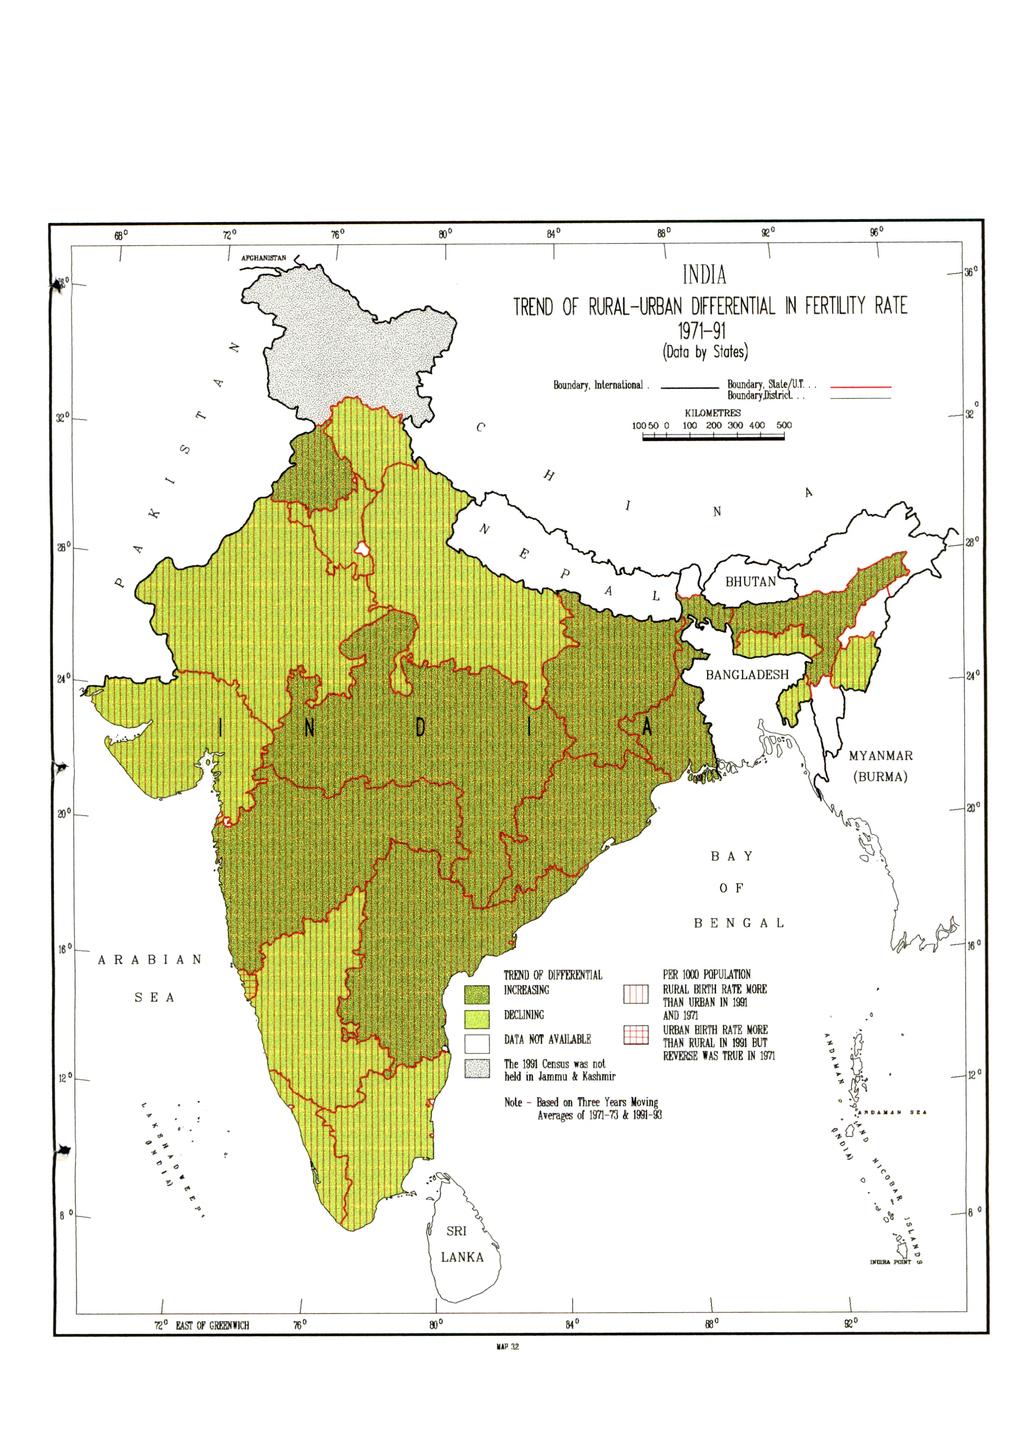 68 72 76 9E 96 INDIA TREND OF RURAL-URBAN DIFFERENTIAL IN FERTILITY RATE 1971-91 (Data by States) Boundary, Inlernational.